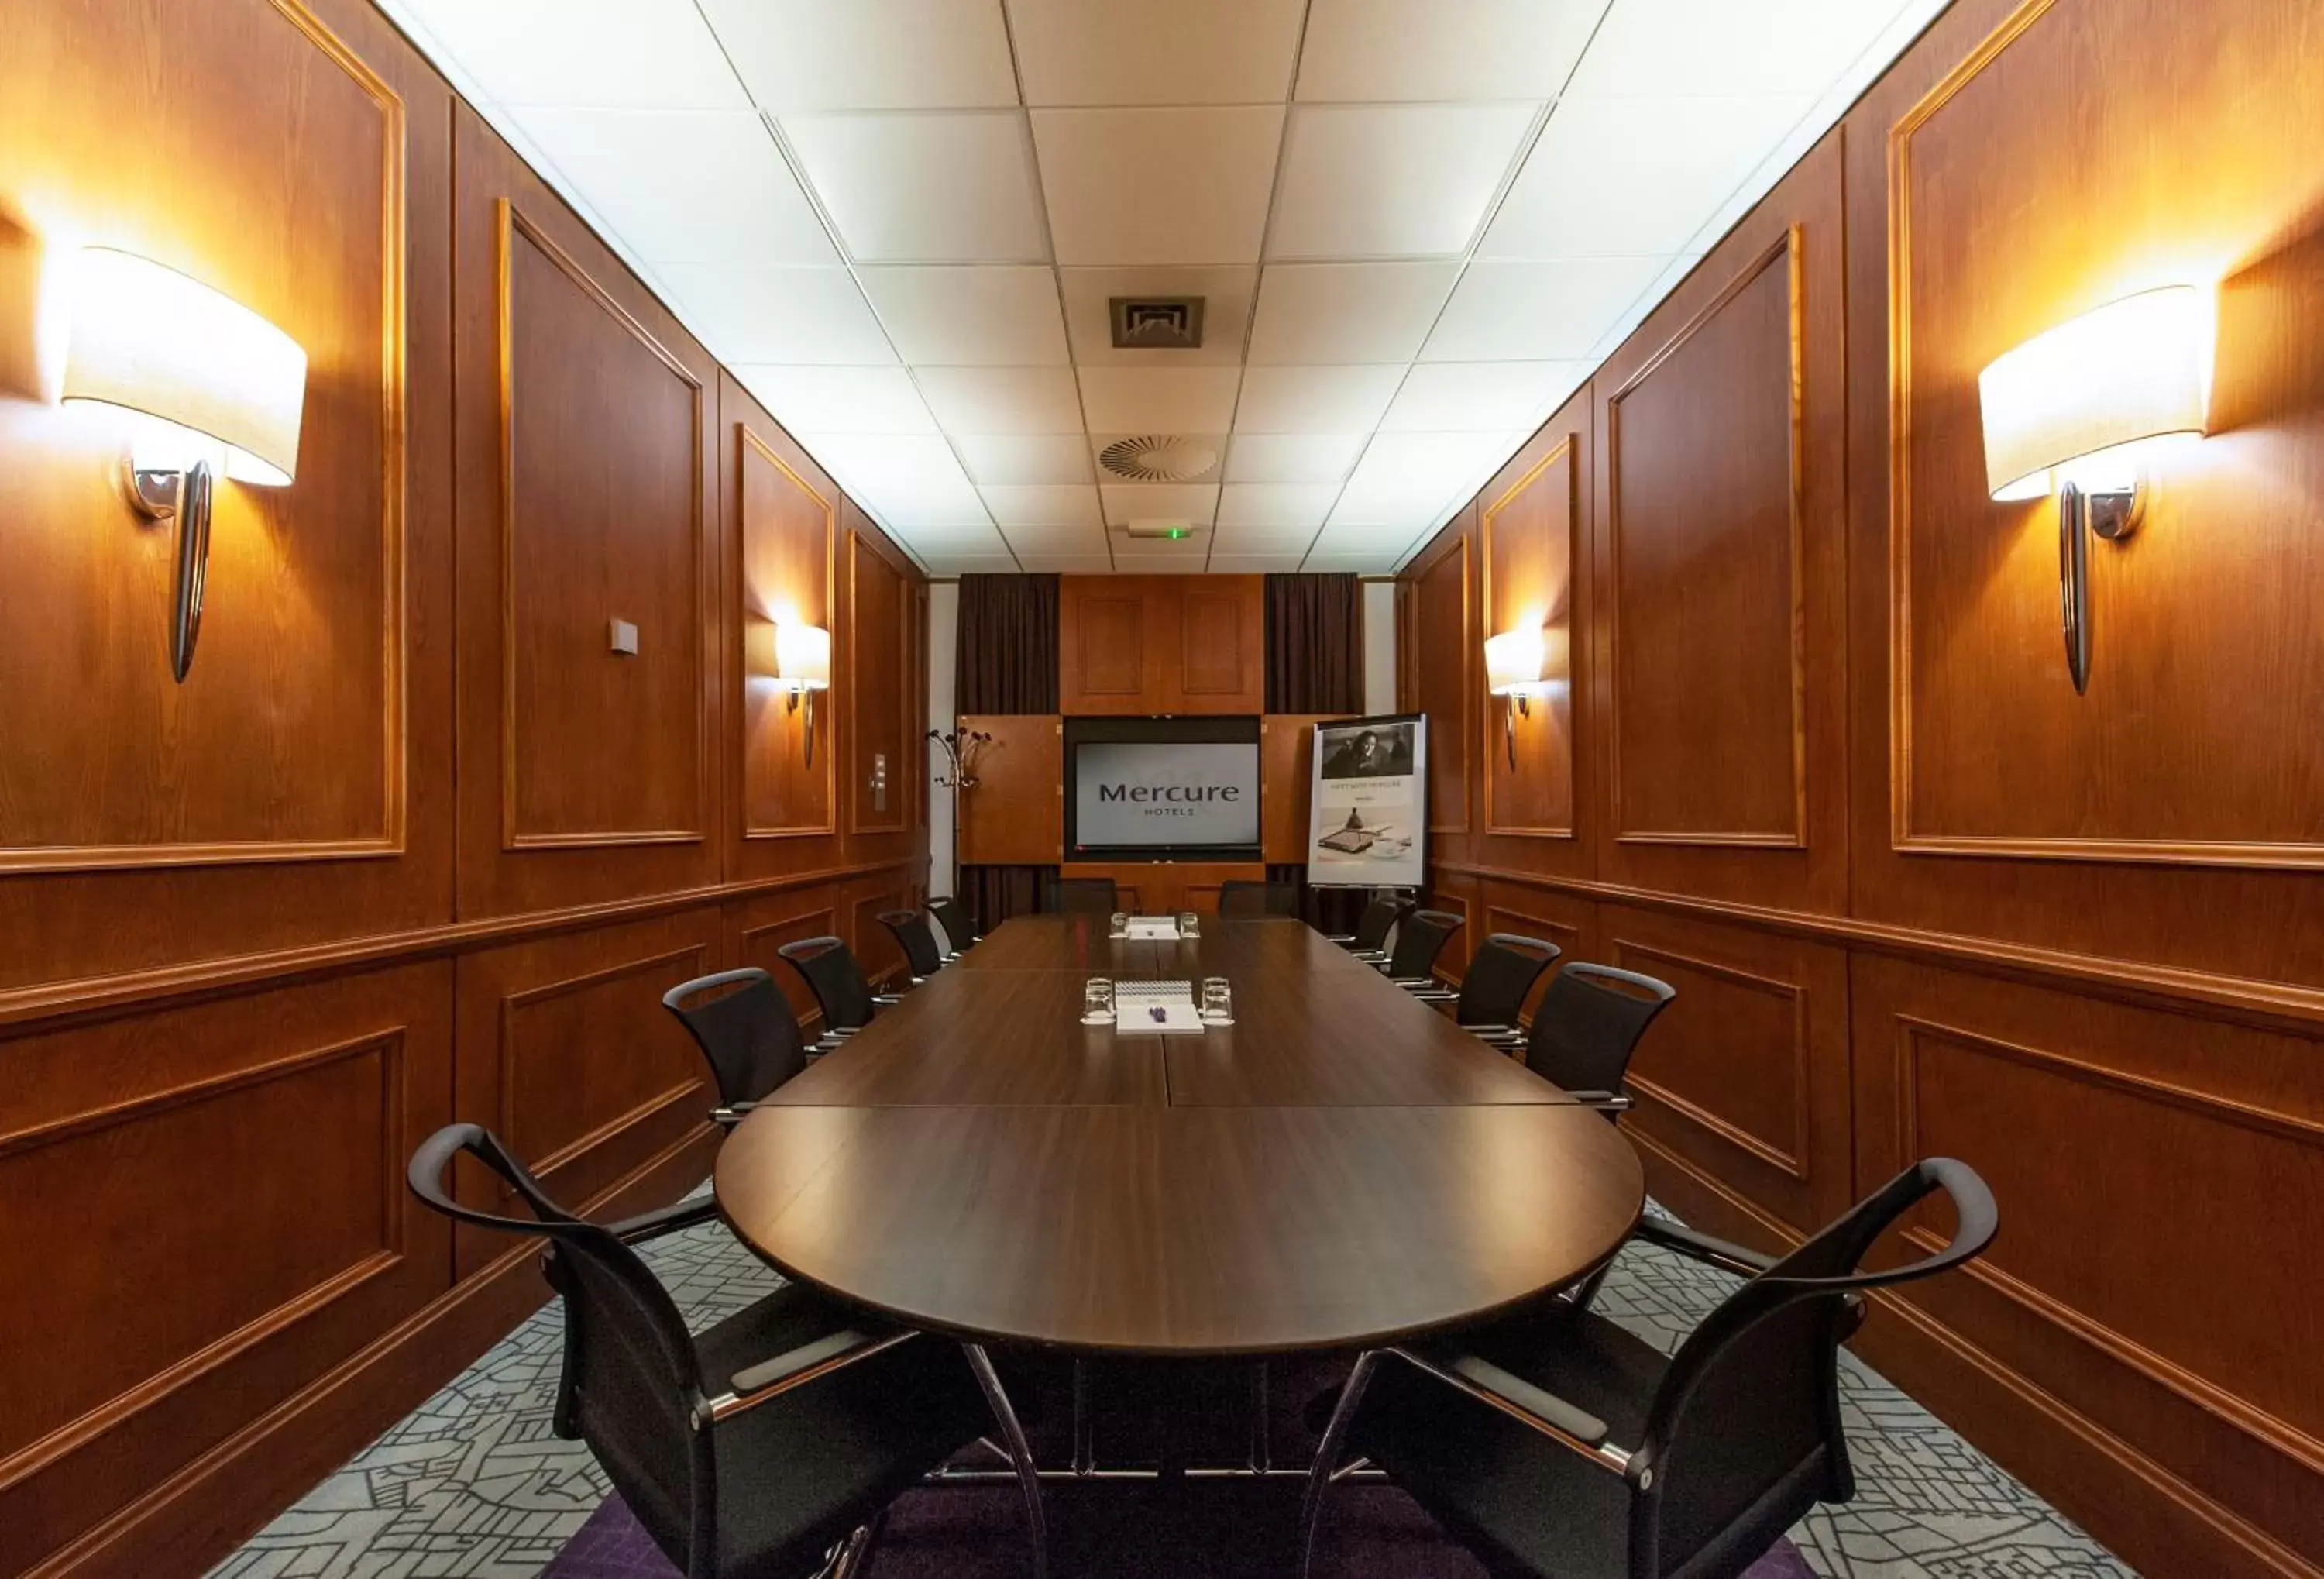 Business facilities in Mercure Telford Centre Hotel